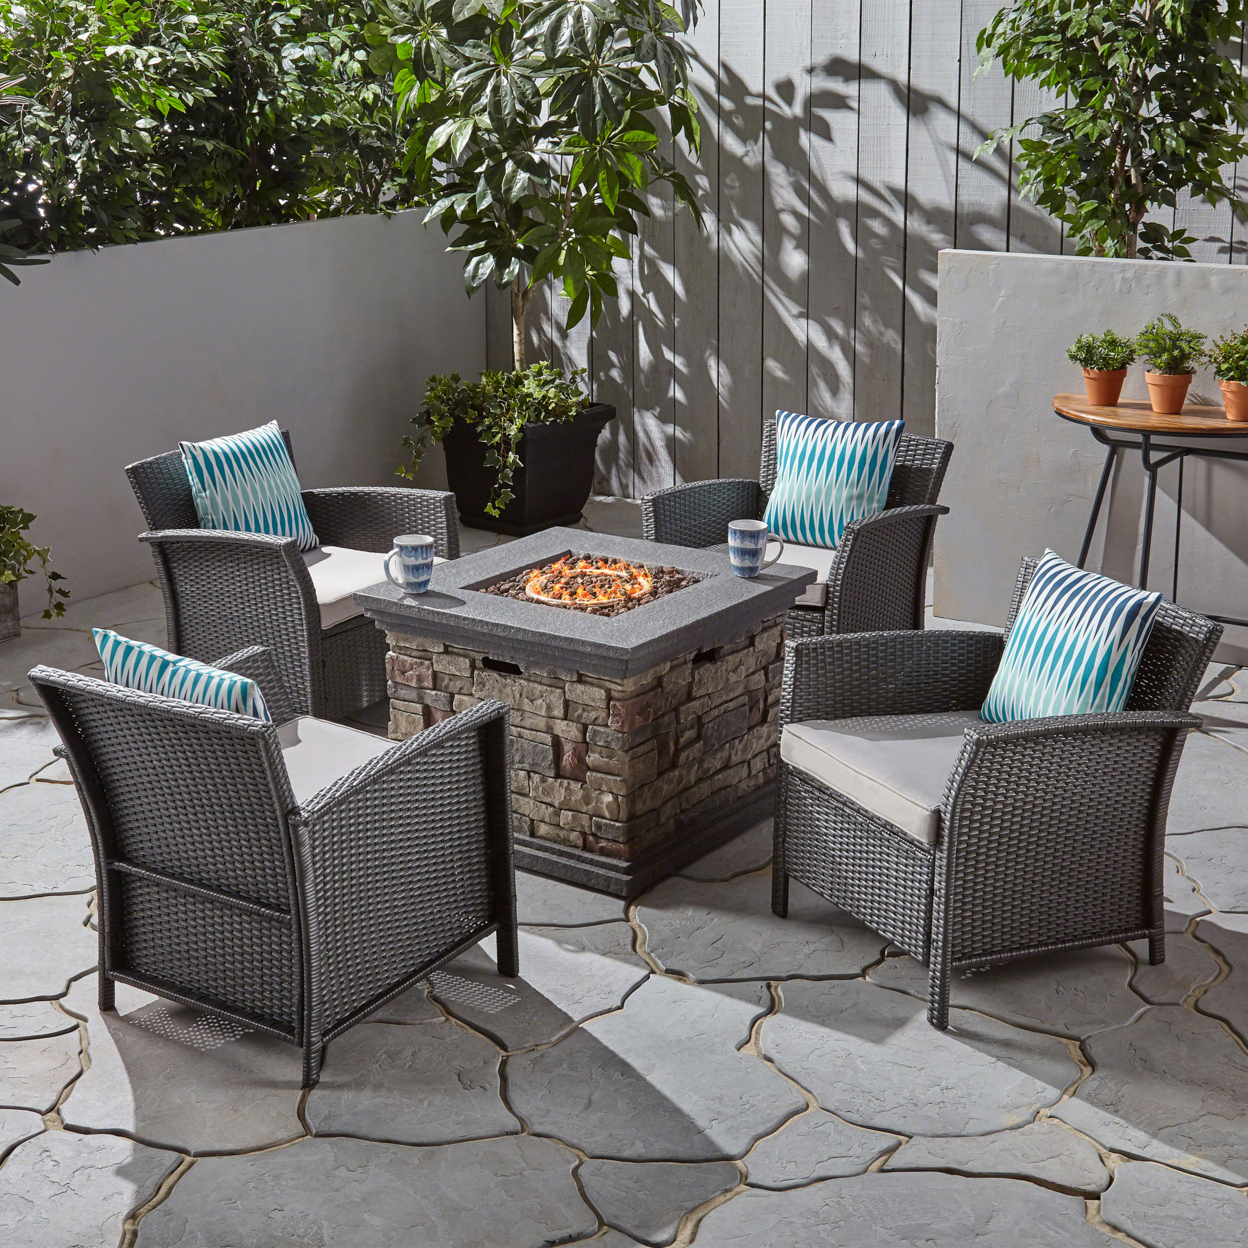 Riley Lucia Outdoor 4 Piece Wicker Club Chair Chat Set With Fire Pit - Gray + Silver + Stone